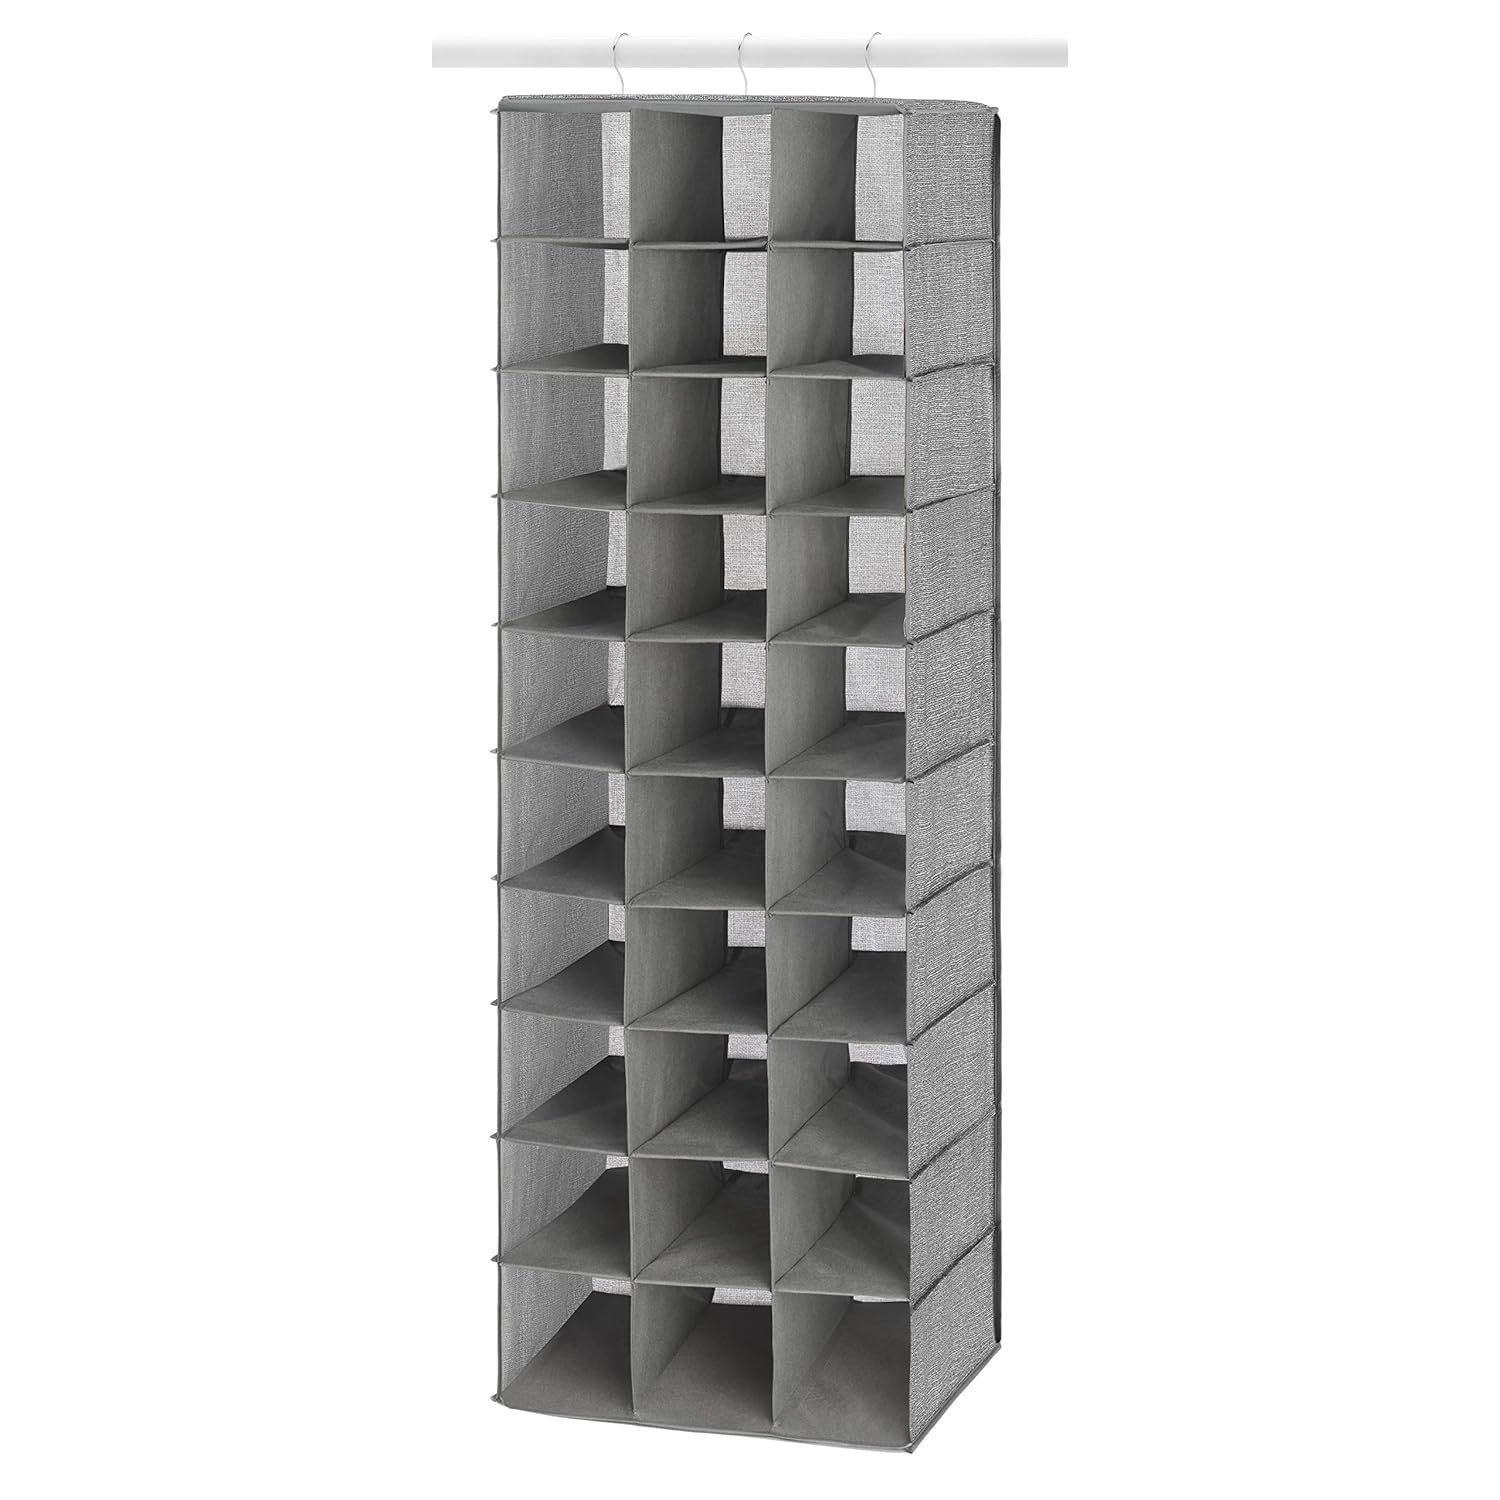 Primary image for Whitmor, Crosshatch Gray, Hanging Shoe Shelves Closet Organizer, 30 Section